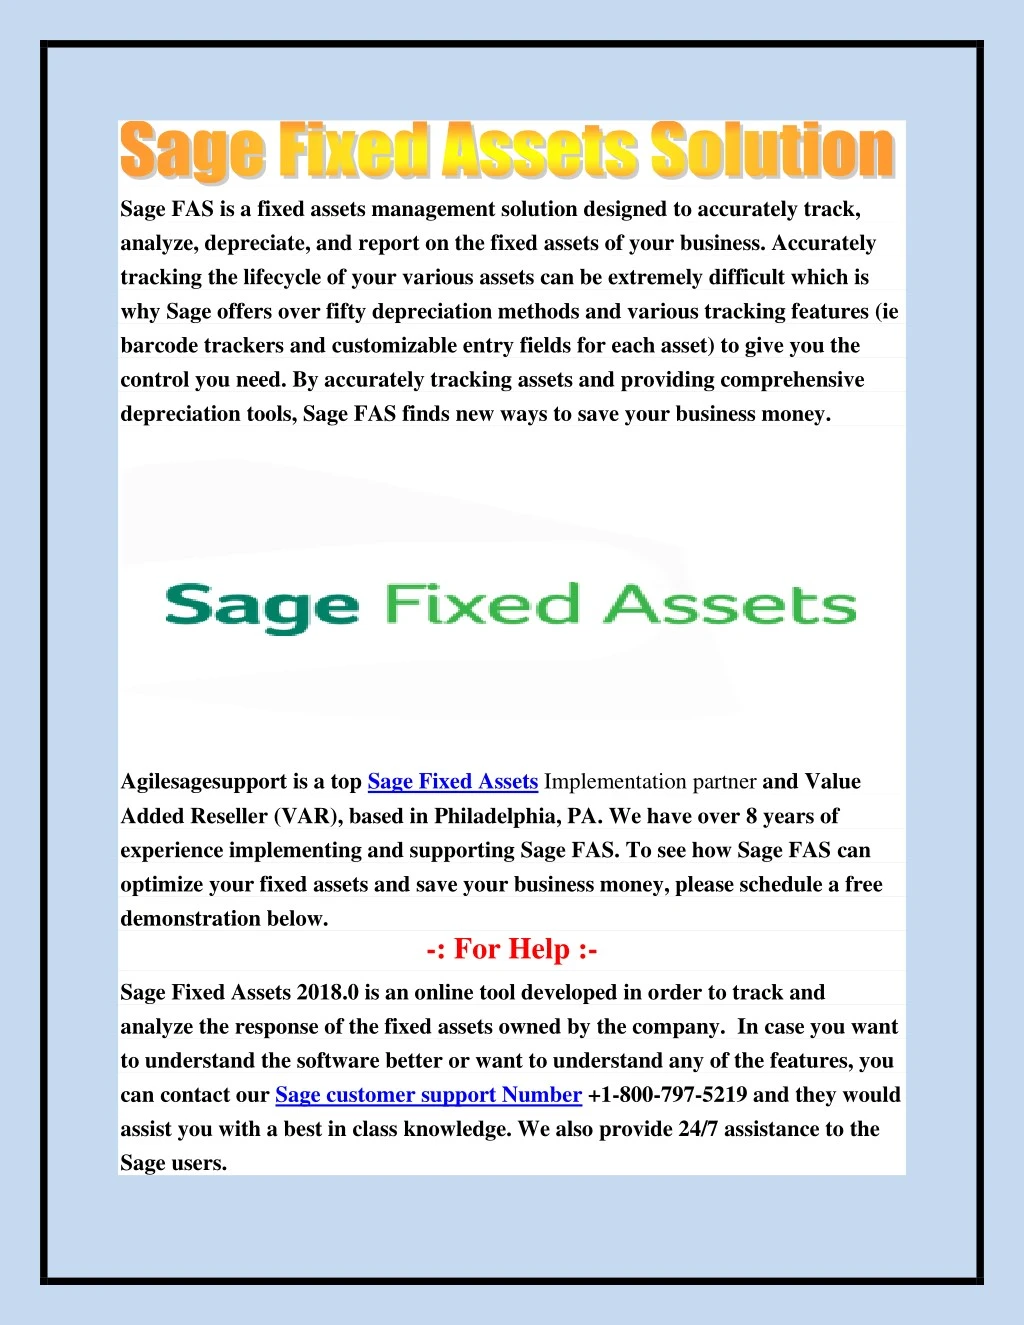 sage fas is a fixed assets management solution